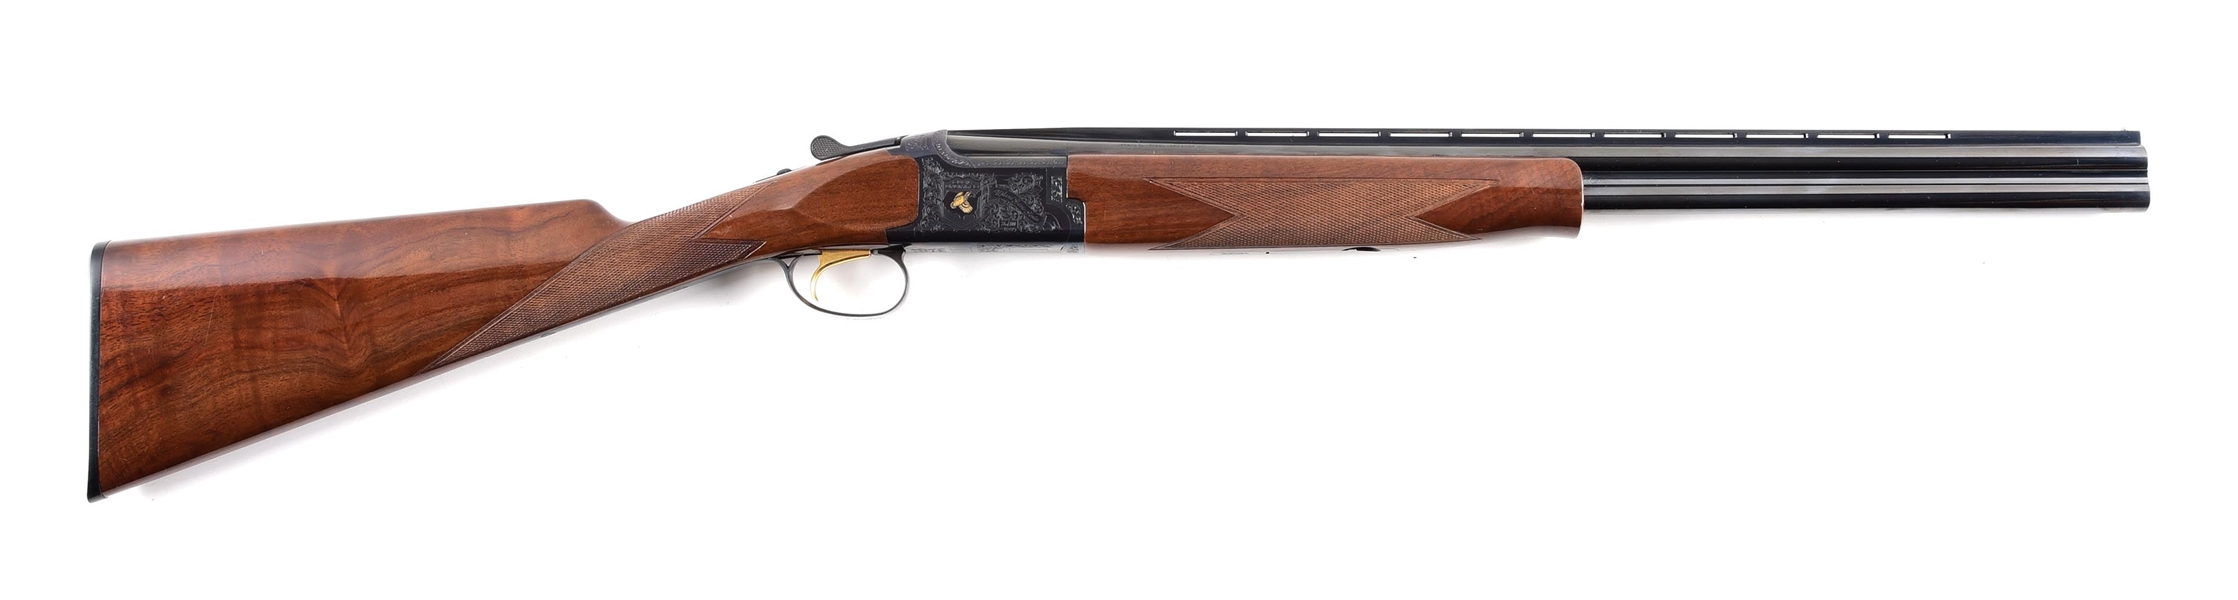 (M) BROWNING QUAIL UNLIMITED 28 BORE OVER UNDER SHOTGUN. 